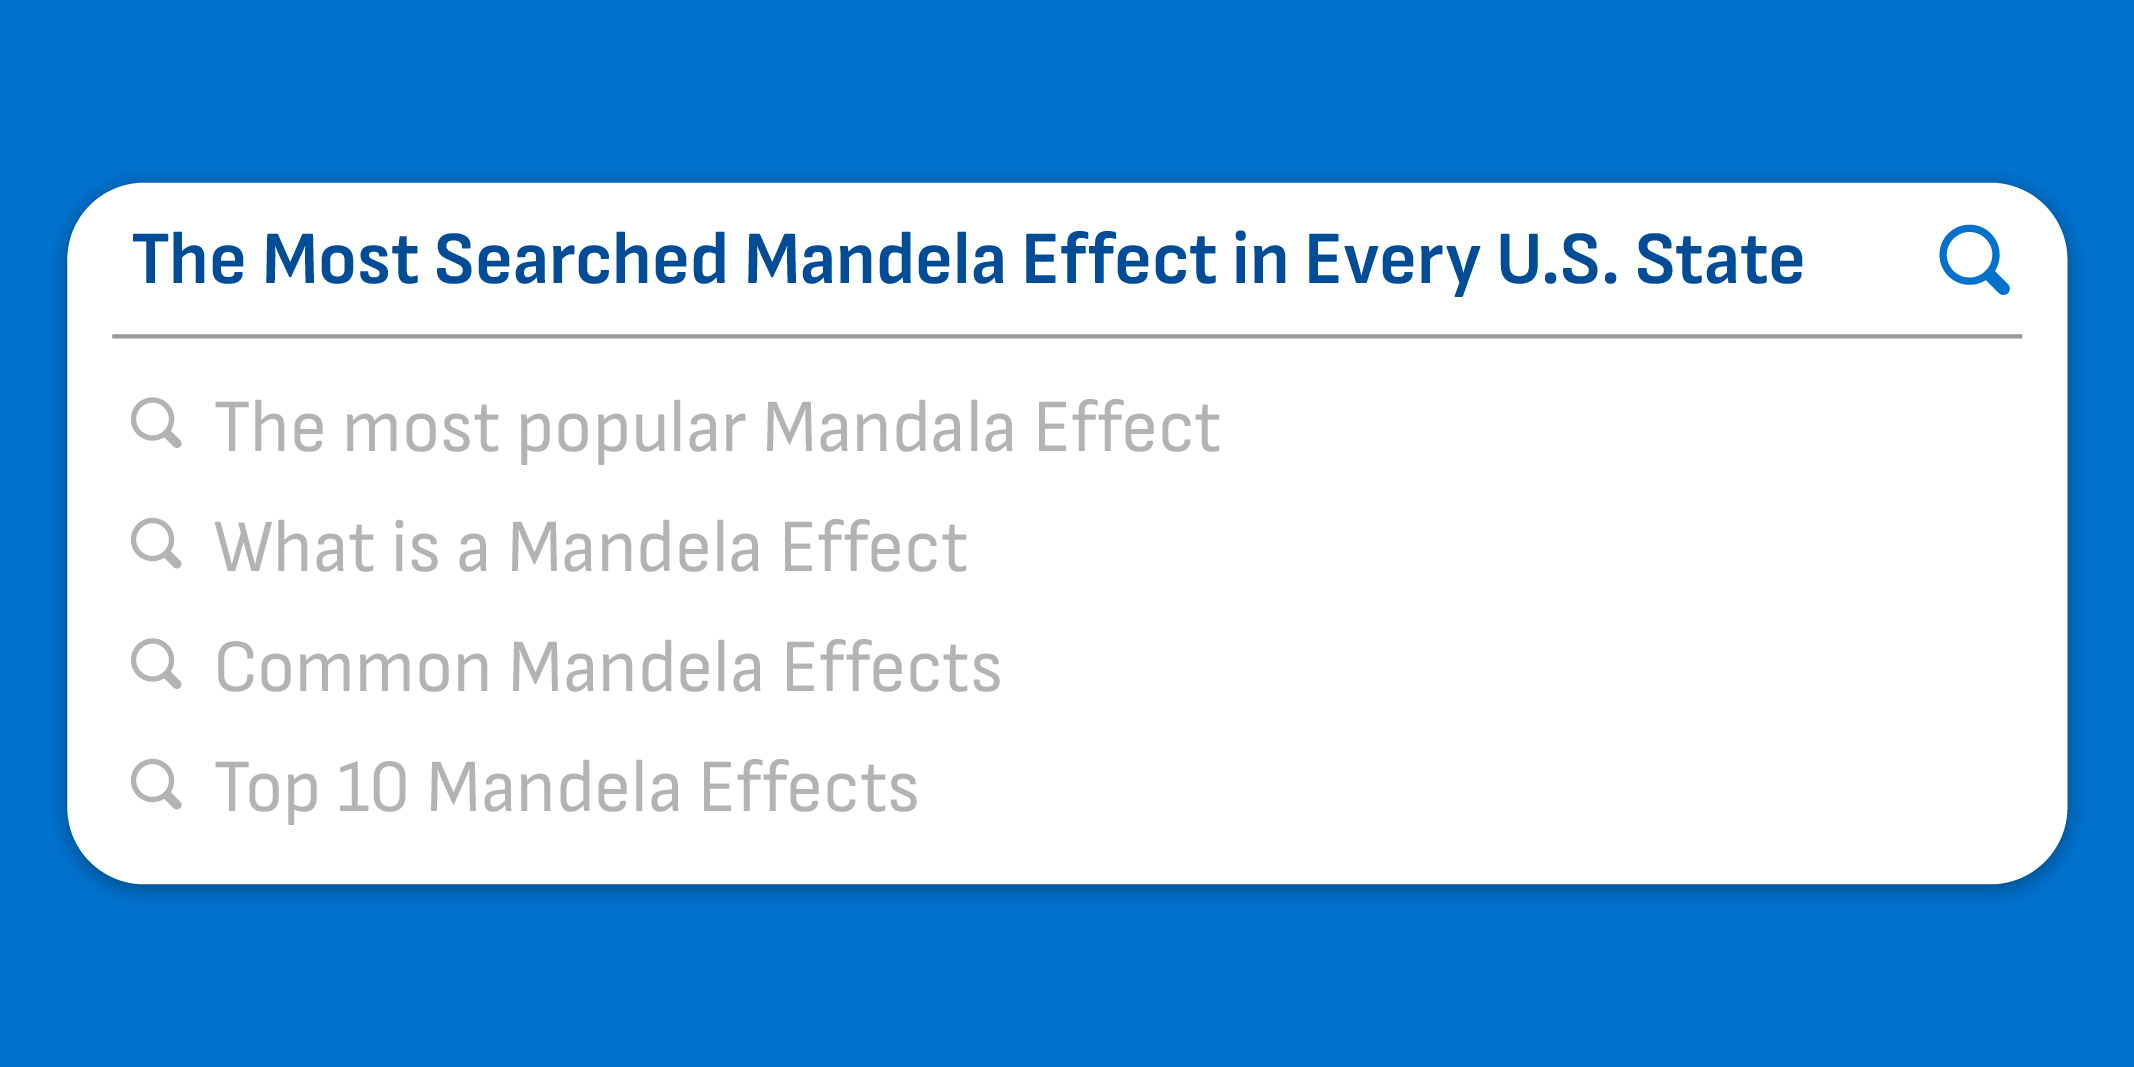 The Most Searched Mandela Effect in Every U.S. State